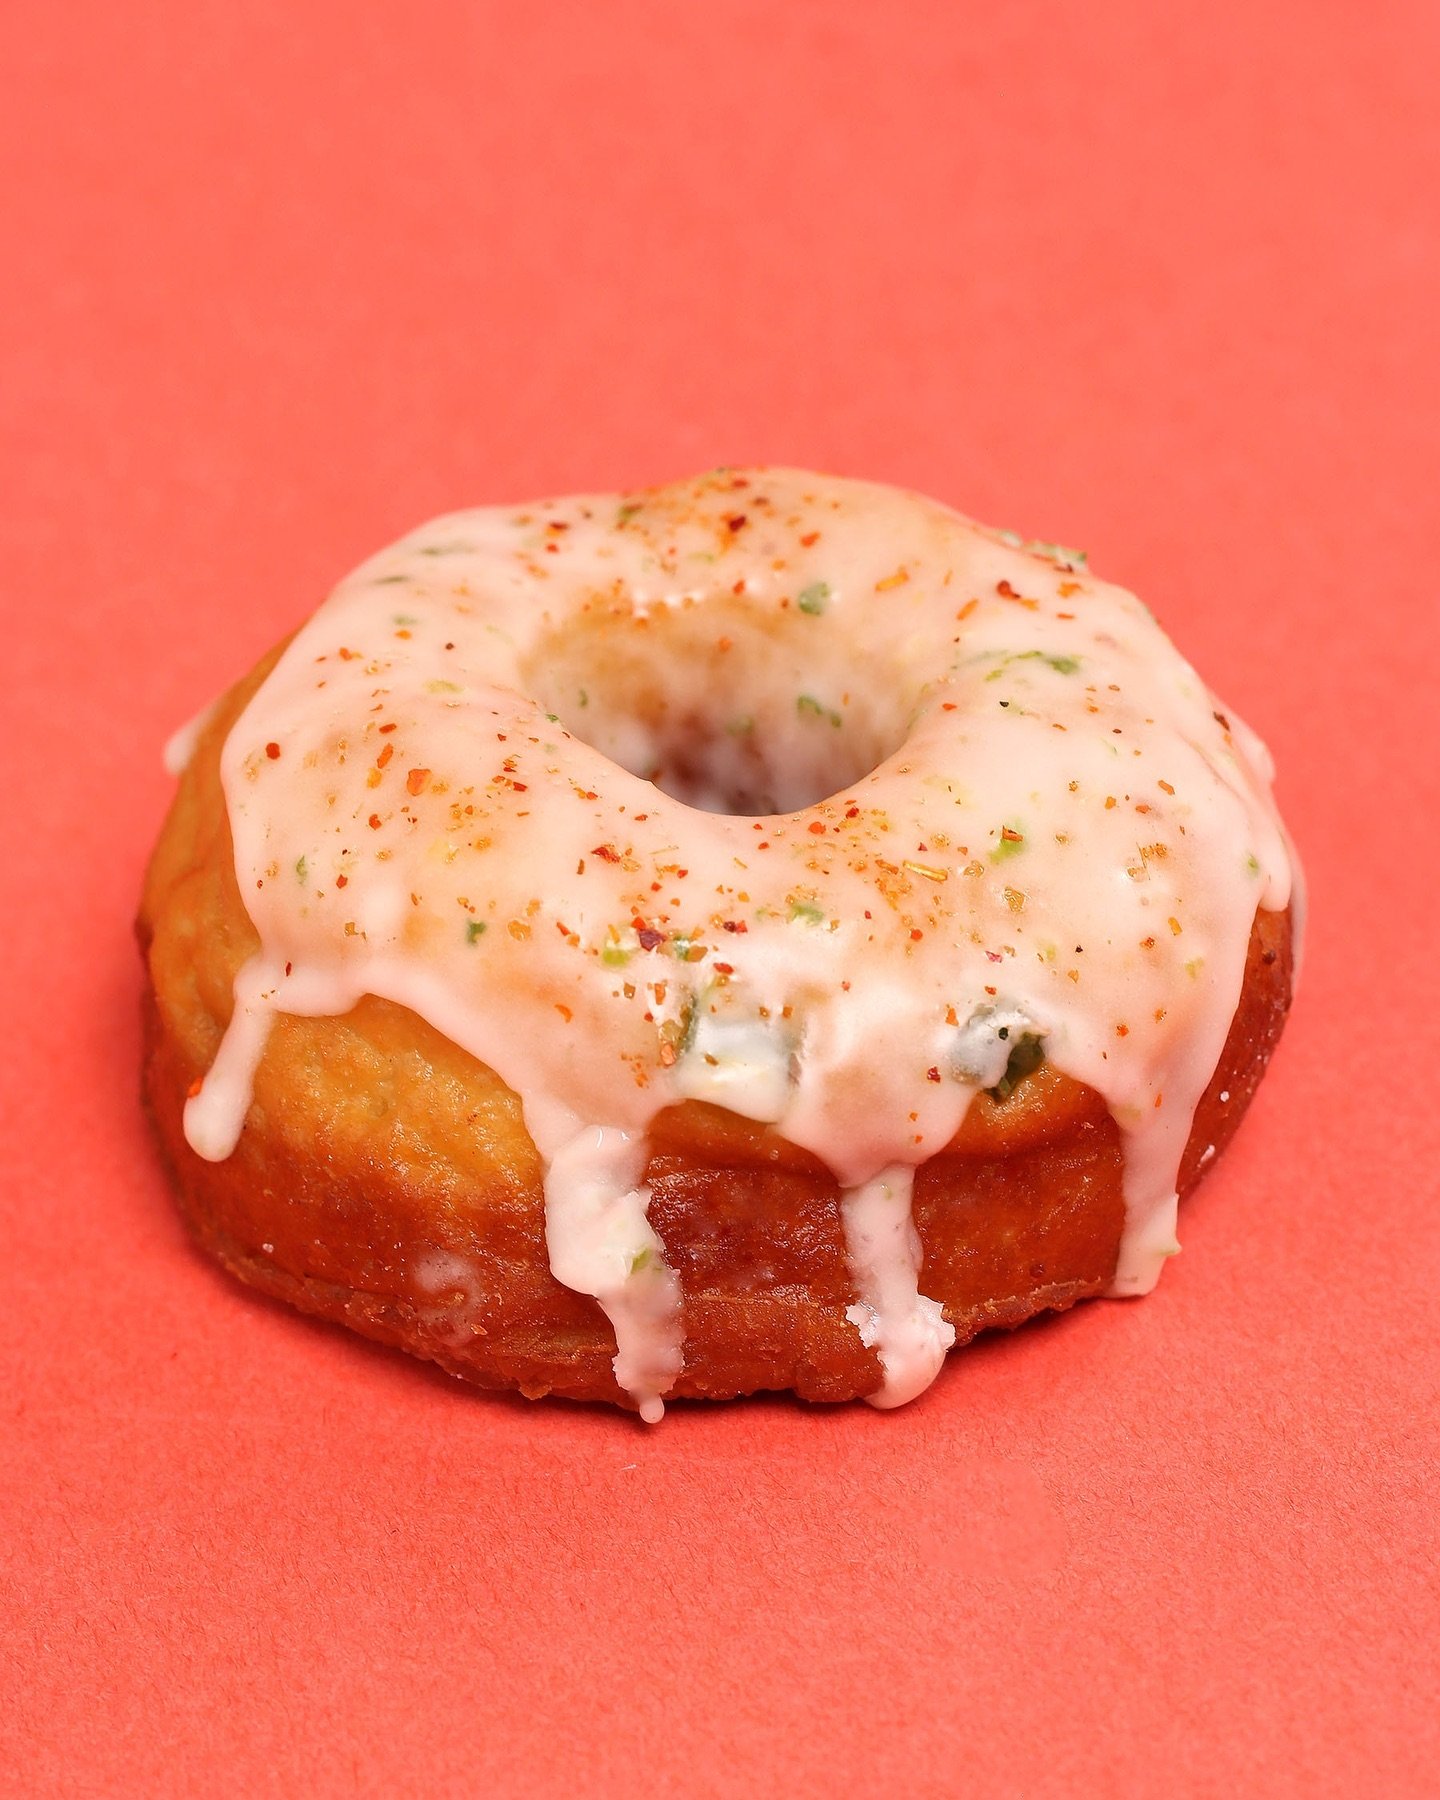 🔥JALAPE&Ntilde;O LIME🔥

Diced jalape&ntilde;o pieces folded into a lemon zest dough. Dipped in a tart lime glaze and sprinkled with Taj&iacute;n.

Donut worry, this is NOT a spicy donut, she just has a little kick